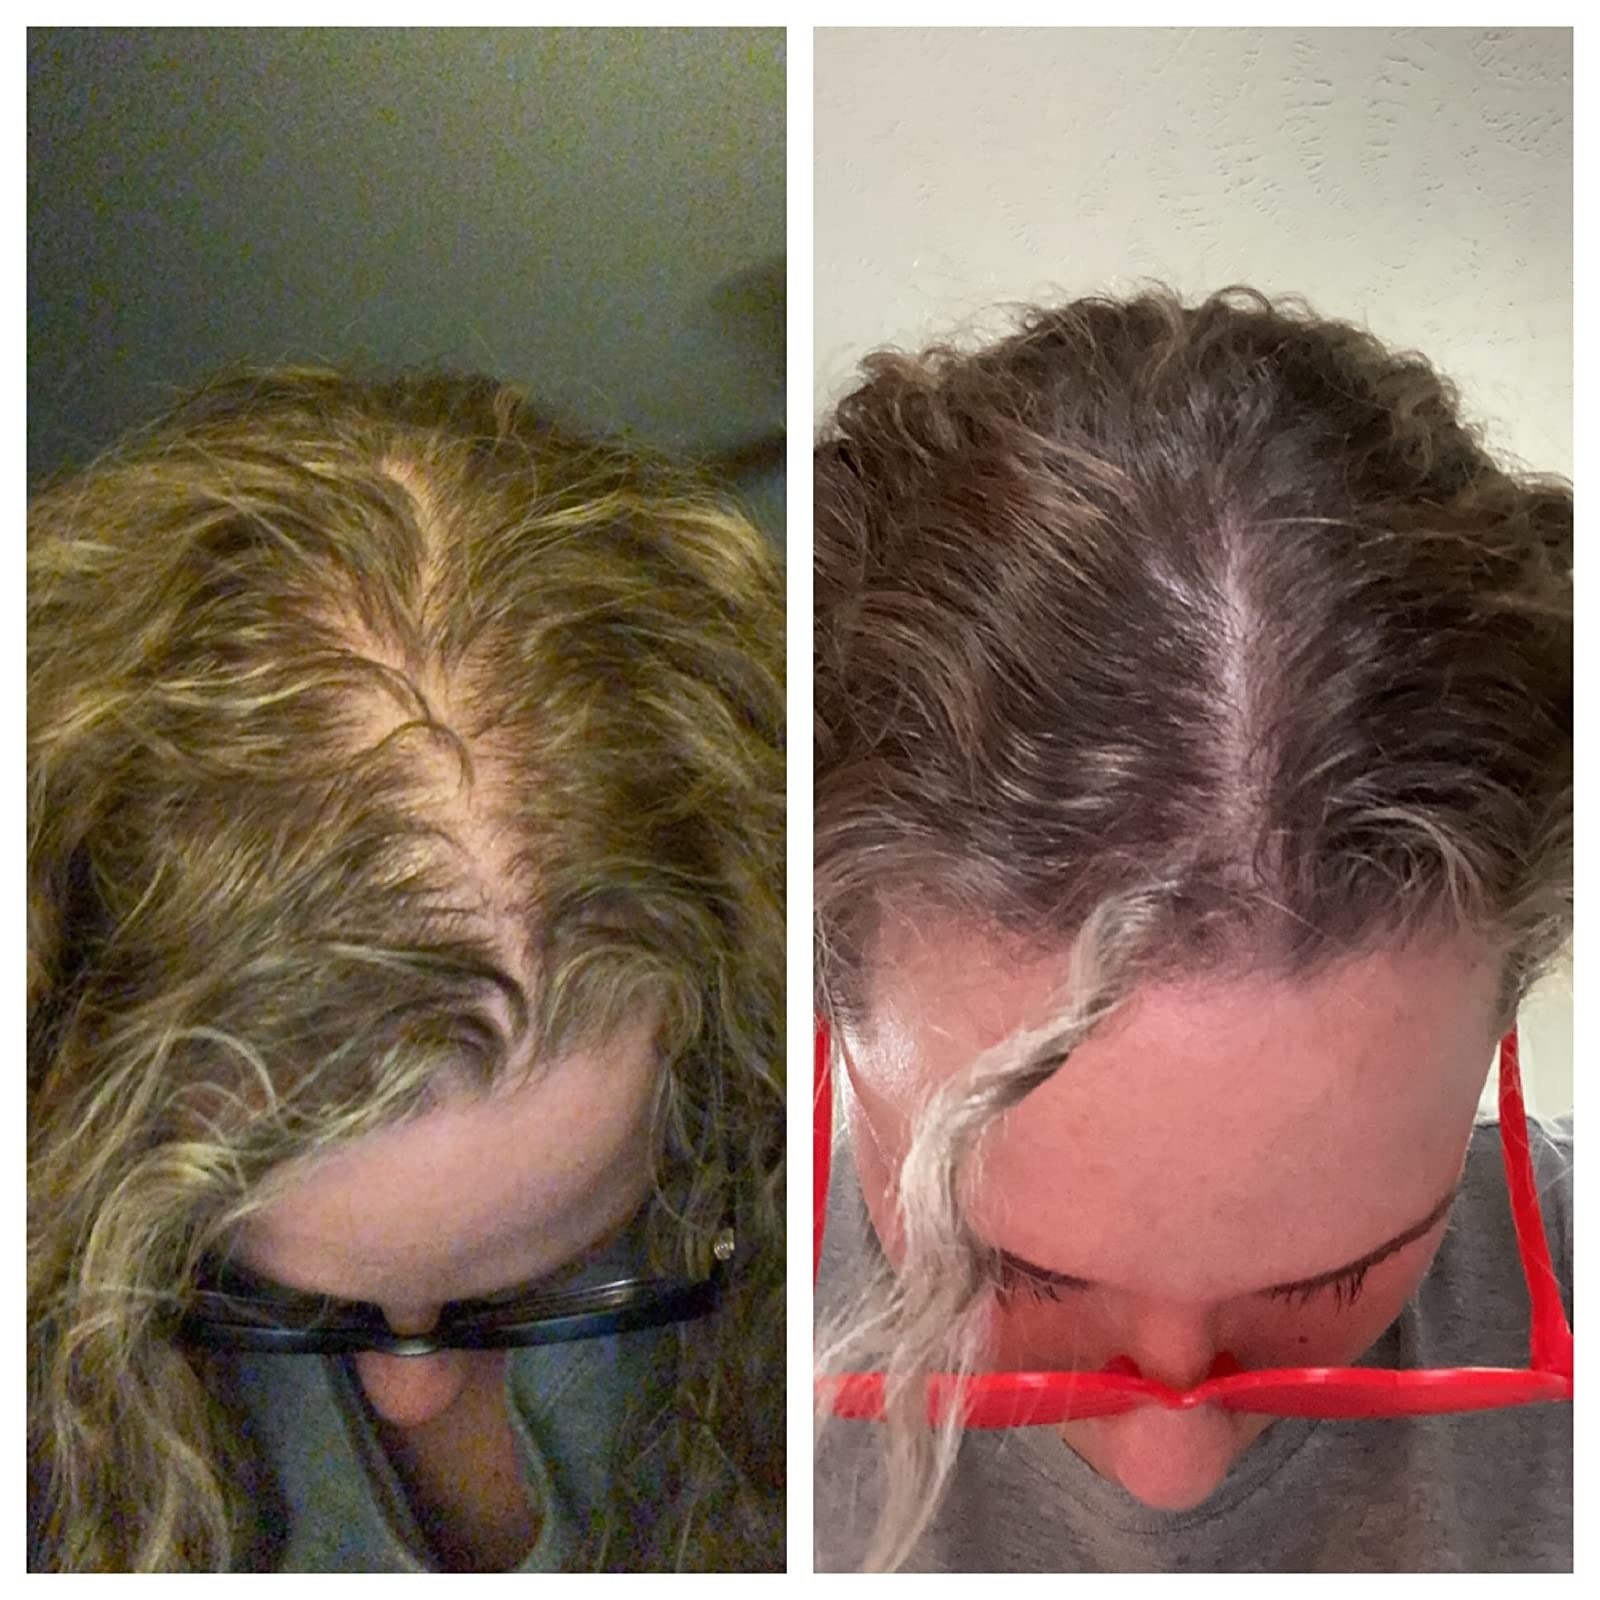 On left, a reviewer showing a bald spot on their head, and on the right, the same reviewer now showing hair starting to grow where the bald spot was